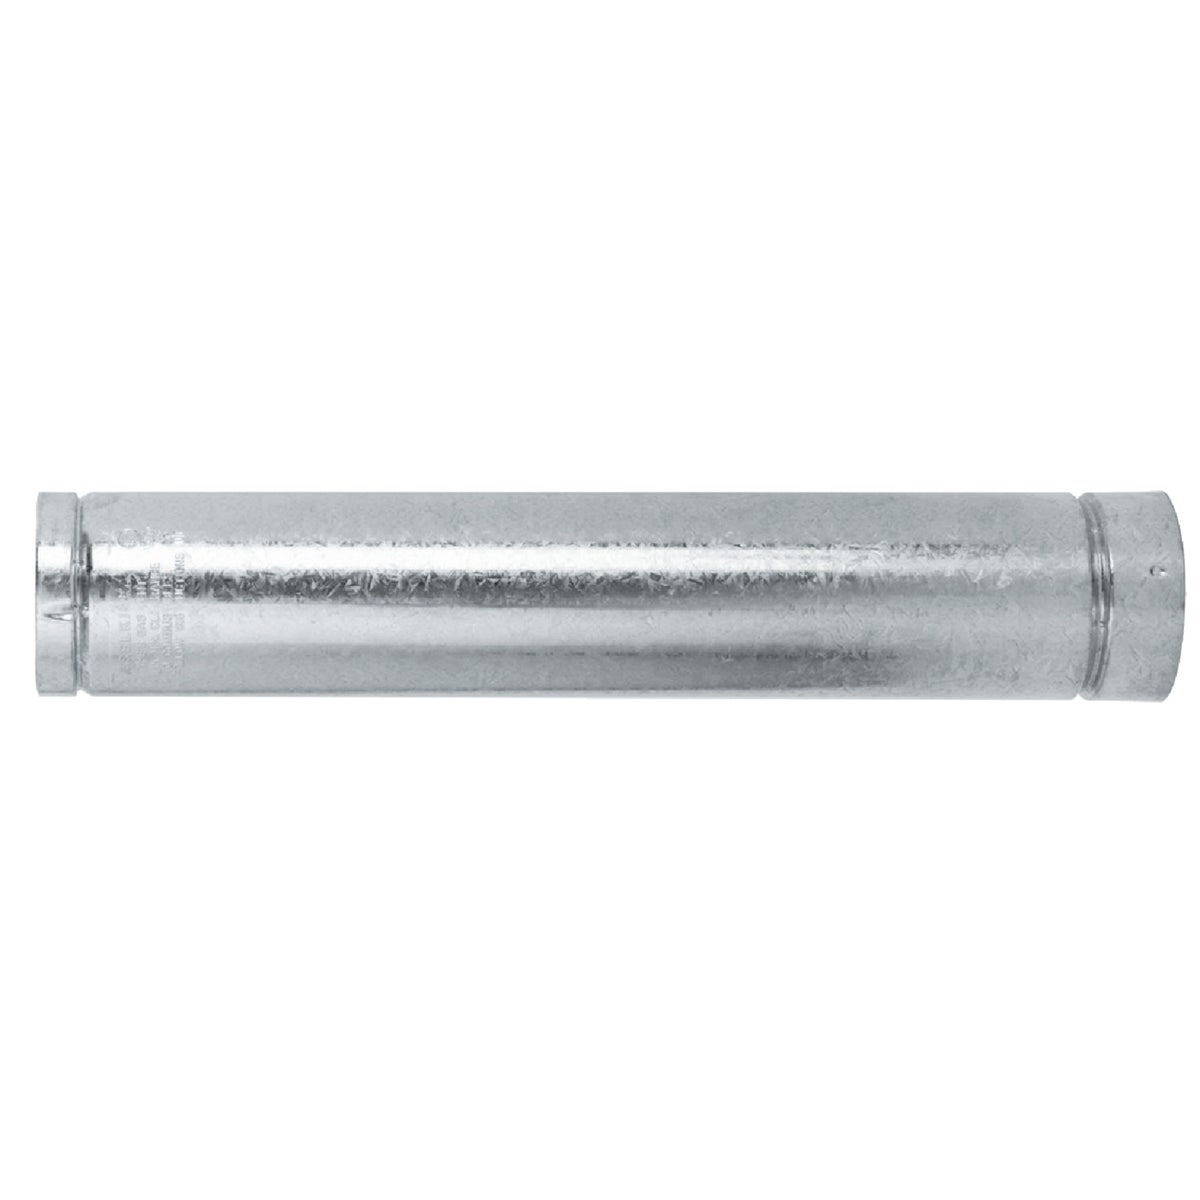 SELKIRK RV 4 In. x 18 In. Round Gas Vent Pipe